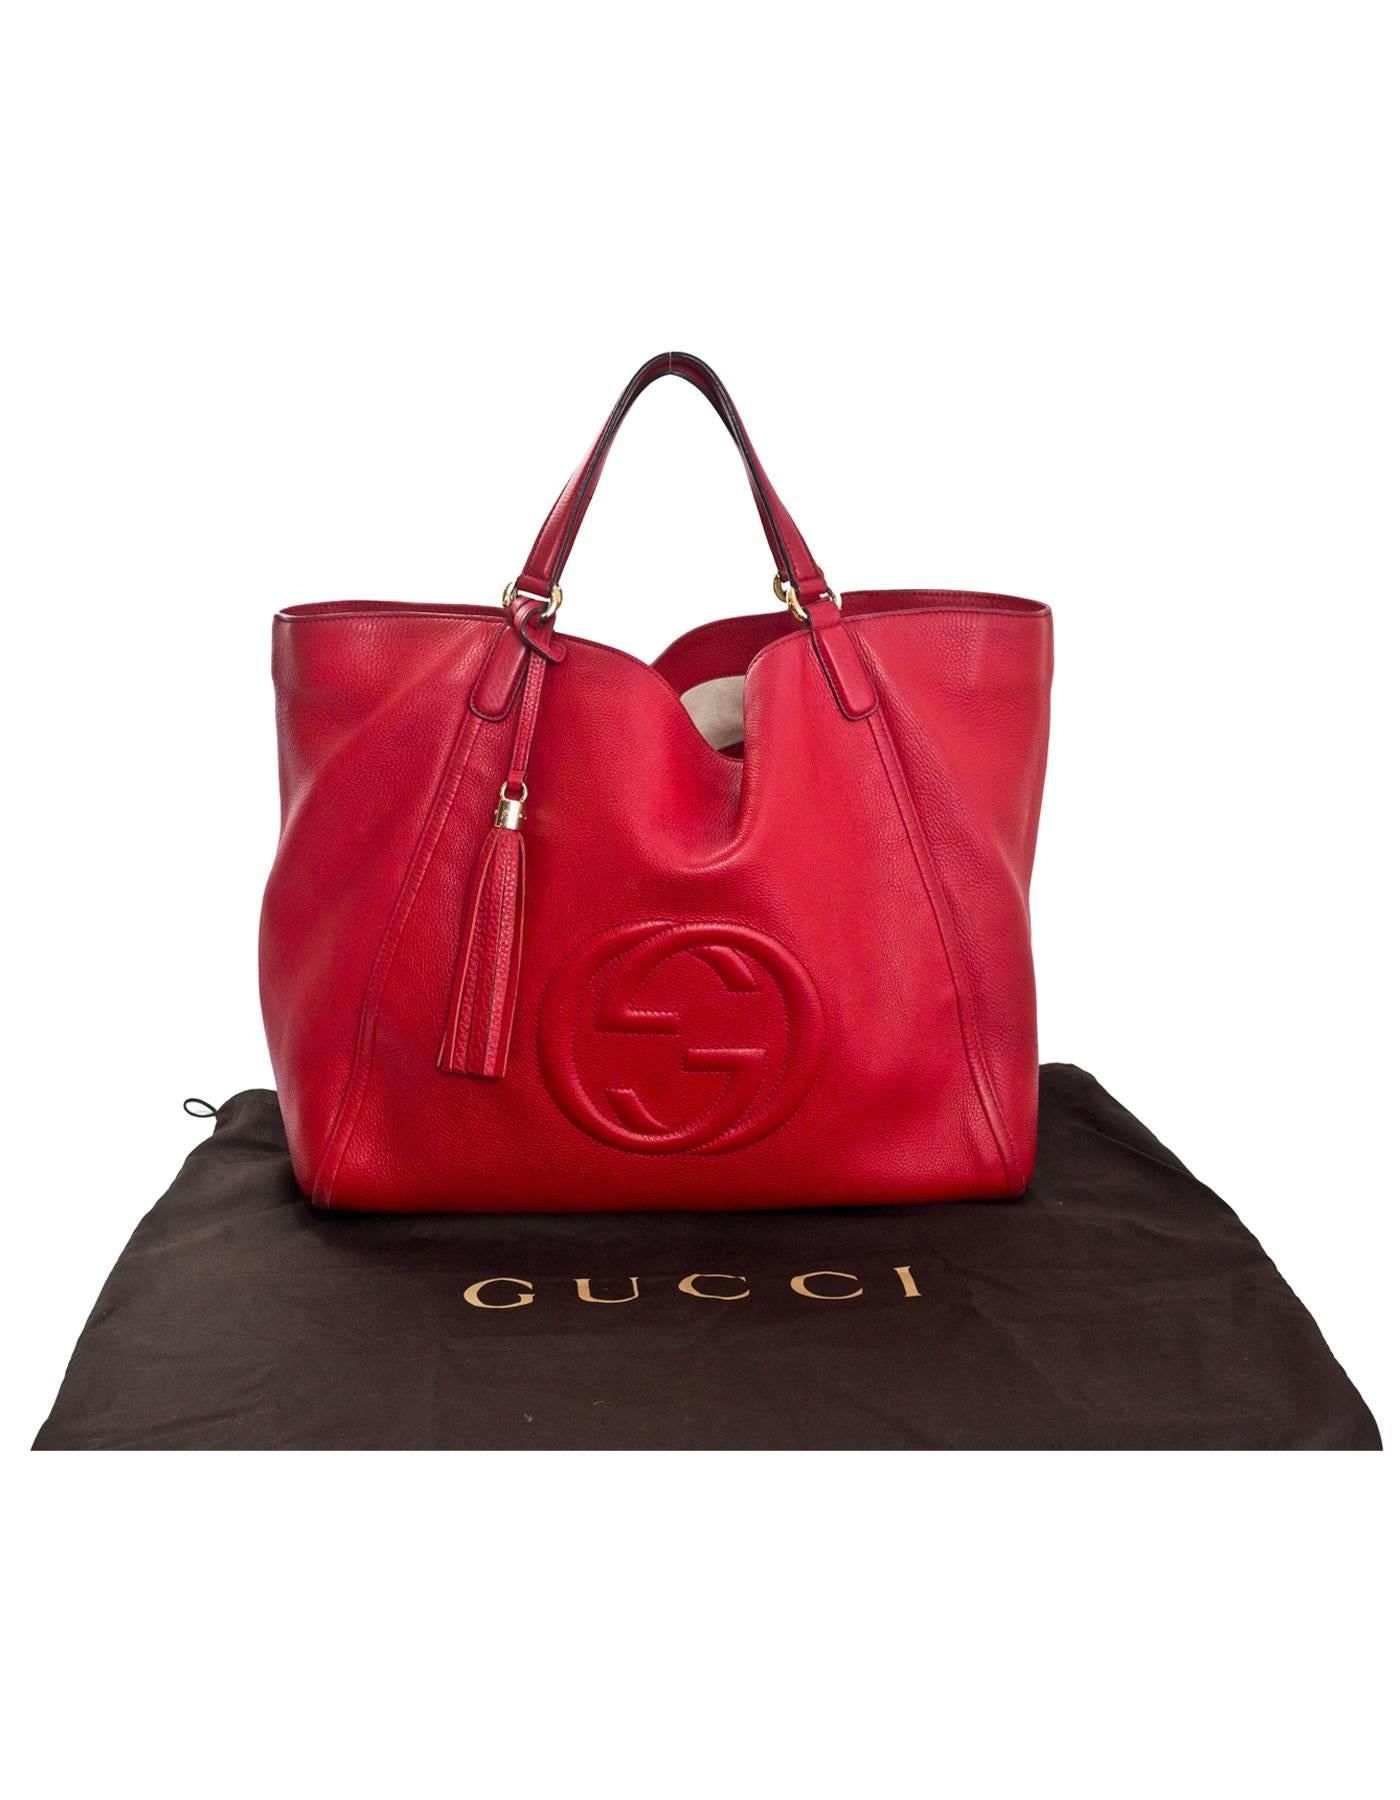 Women's Gucci Red Leather Large Soho Tote Bag